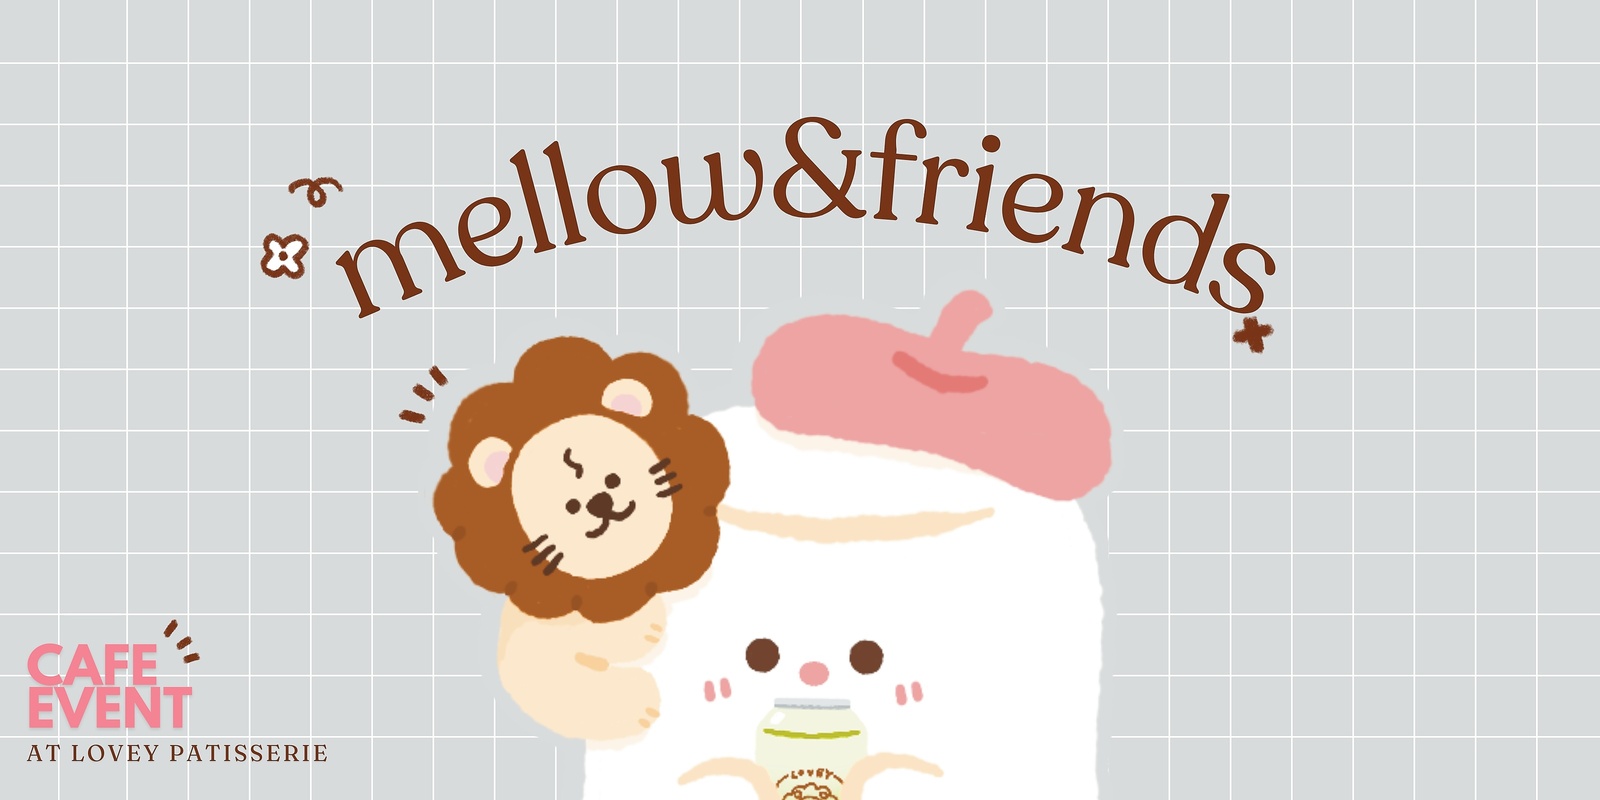 Banner image for Saturdays at Lovey Patisserie Cafe - mellow&friends